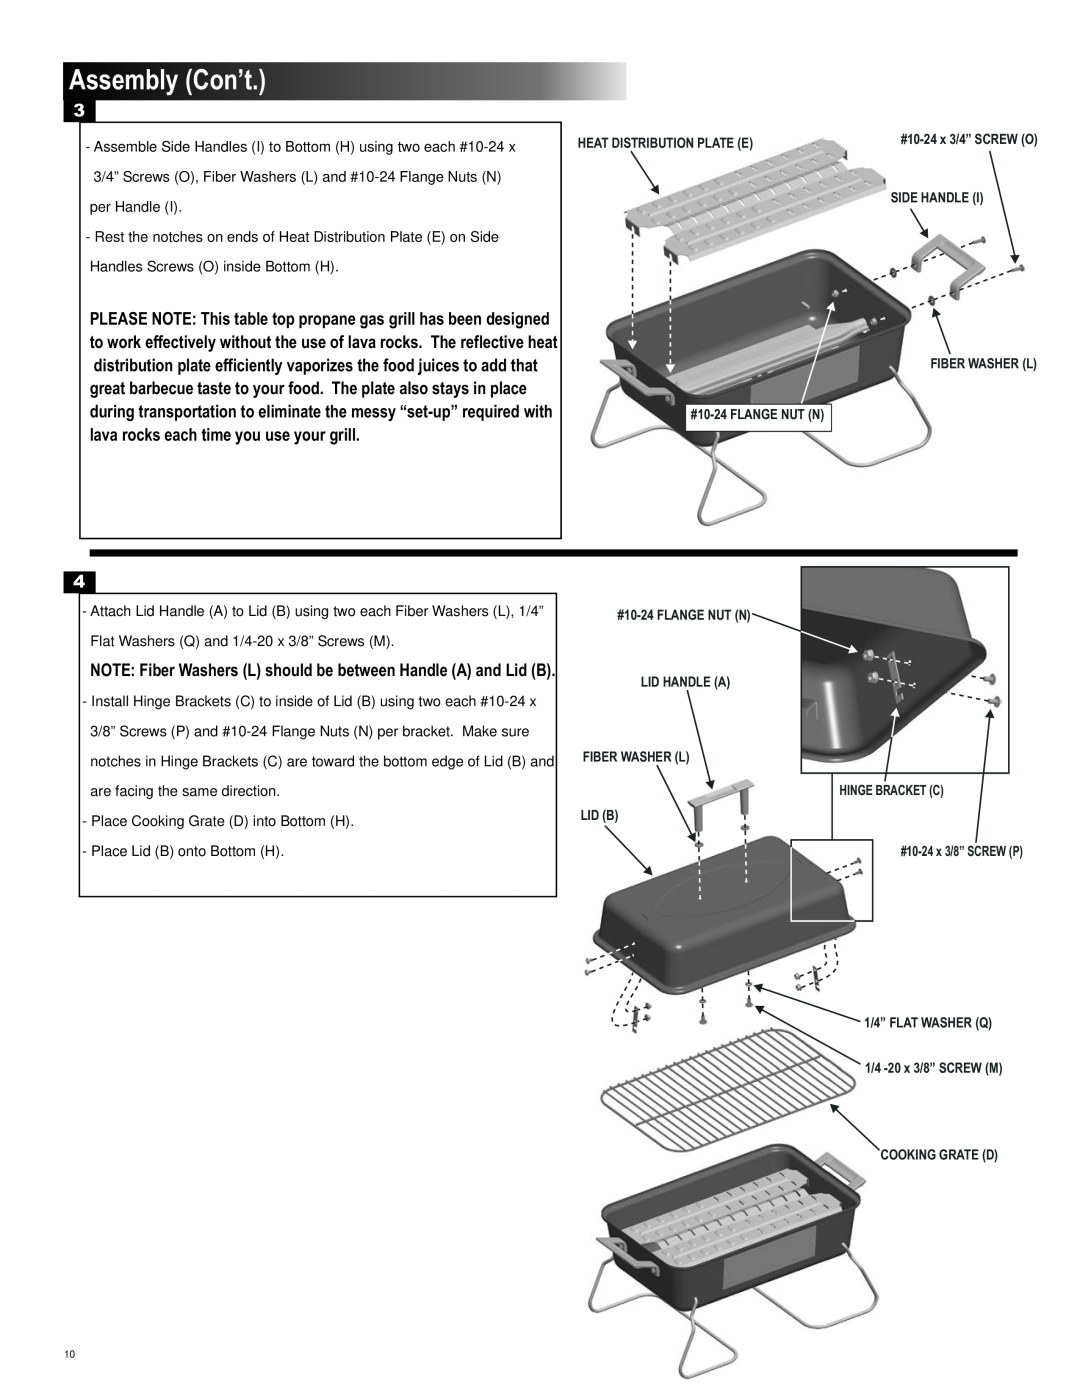 Char-Broil 461111811 manual Assembly Con’t, per Handle, Place Cooking Grate D into Bottom H Place Lid B onto Bottom H 